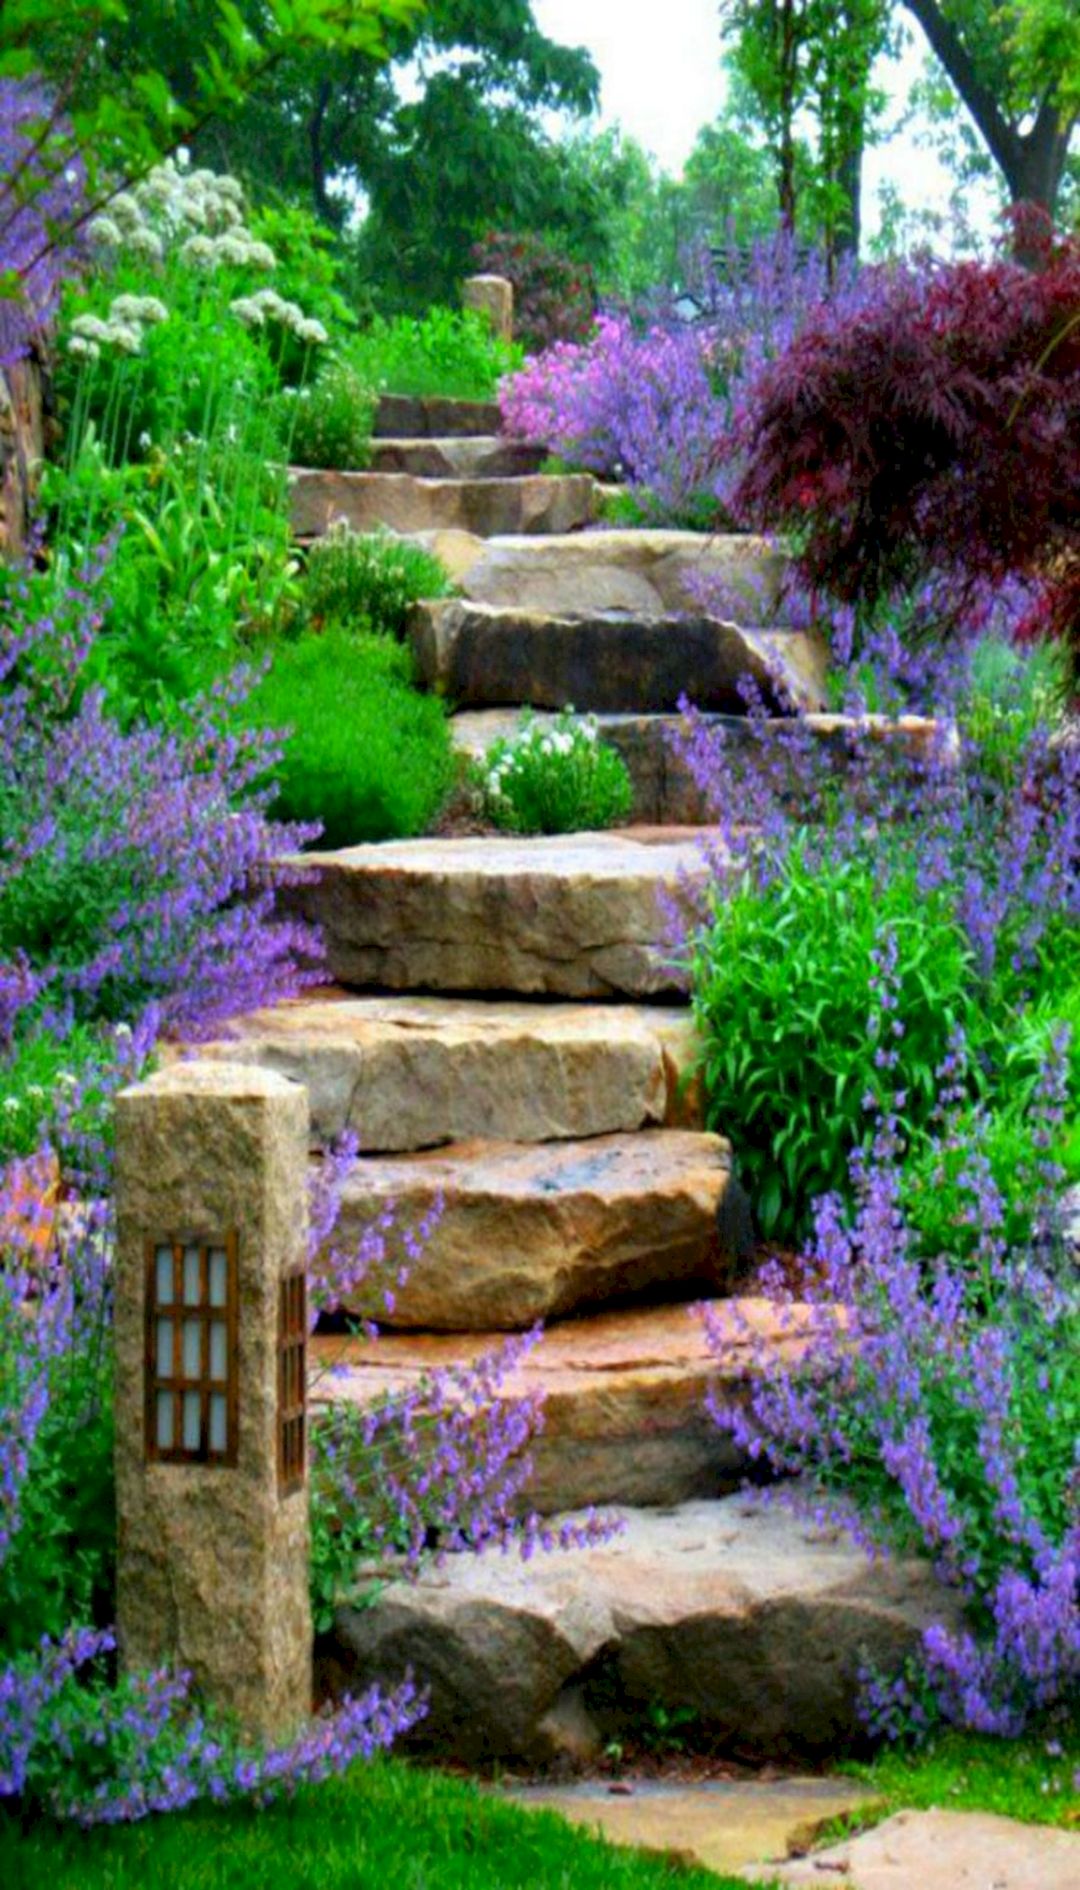 Garden Path using Large Stone That will make your garden look Natural